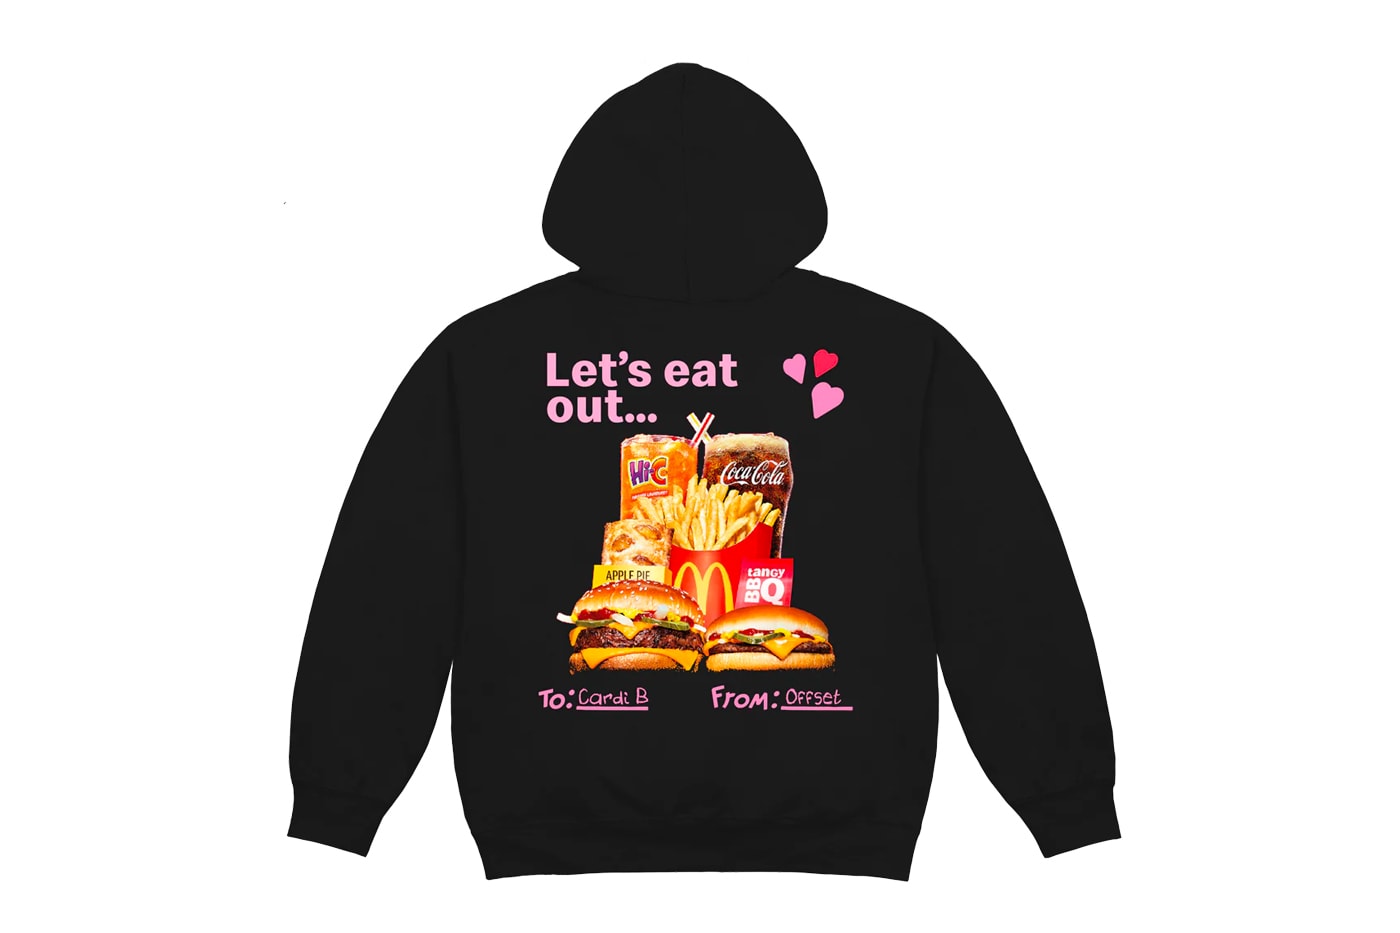 McDonald's Cardi B & Offset Meal Merch Collection Release Info